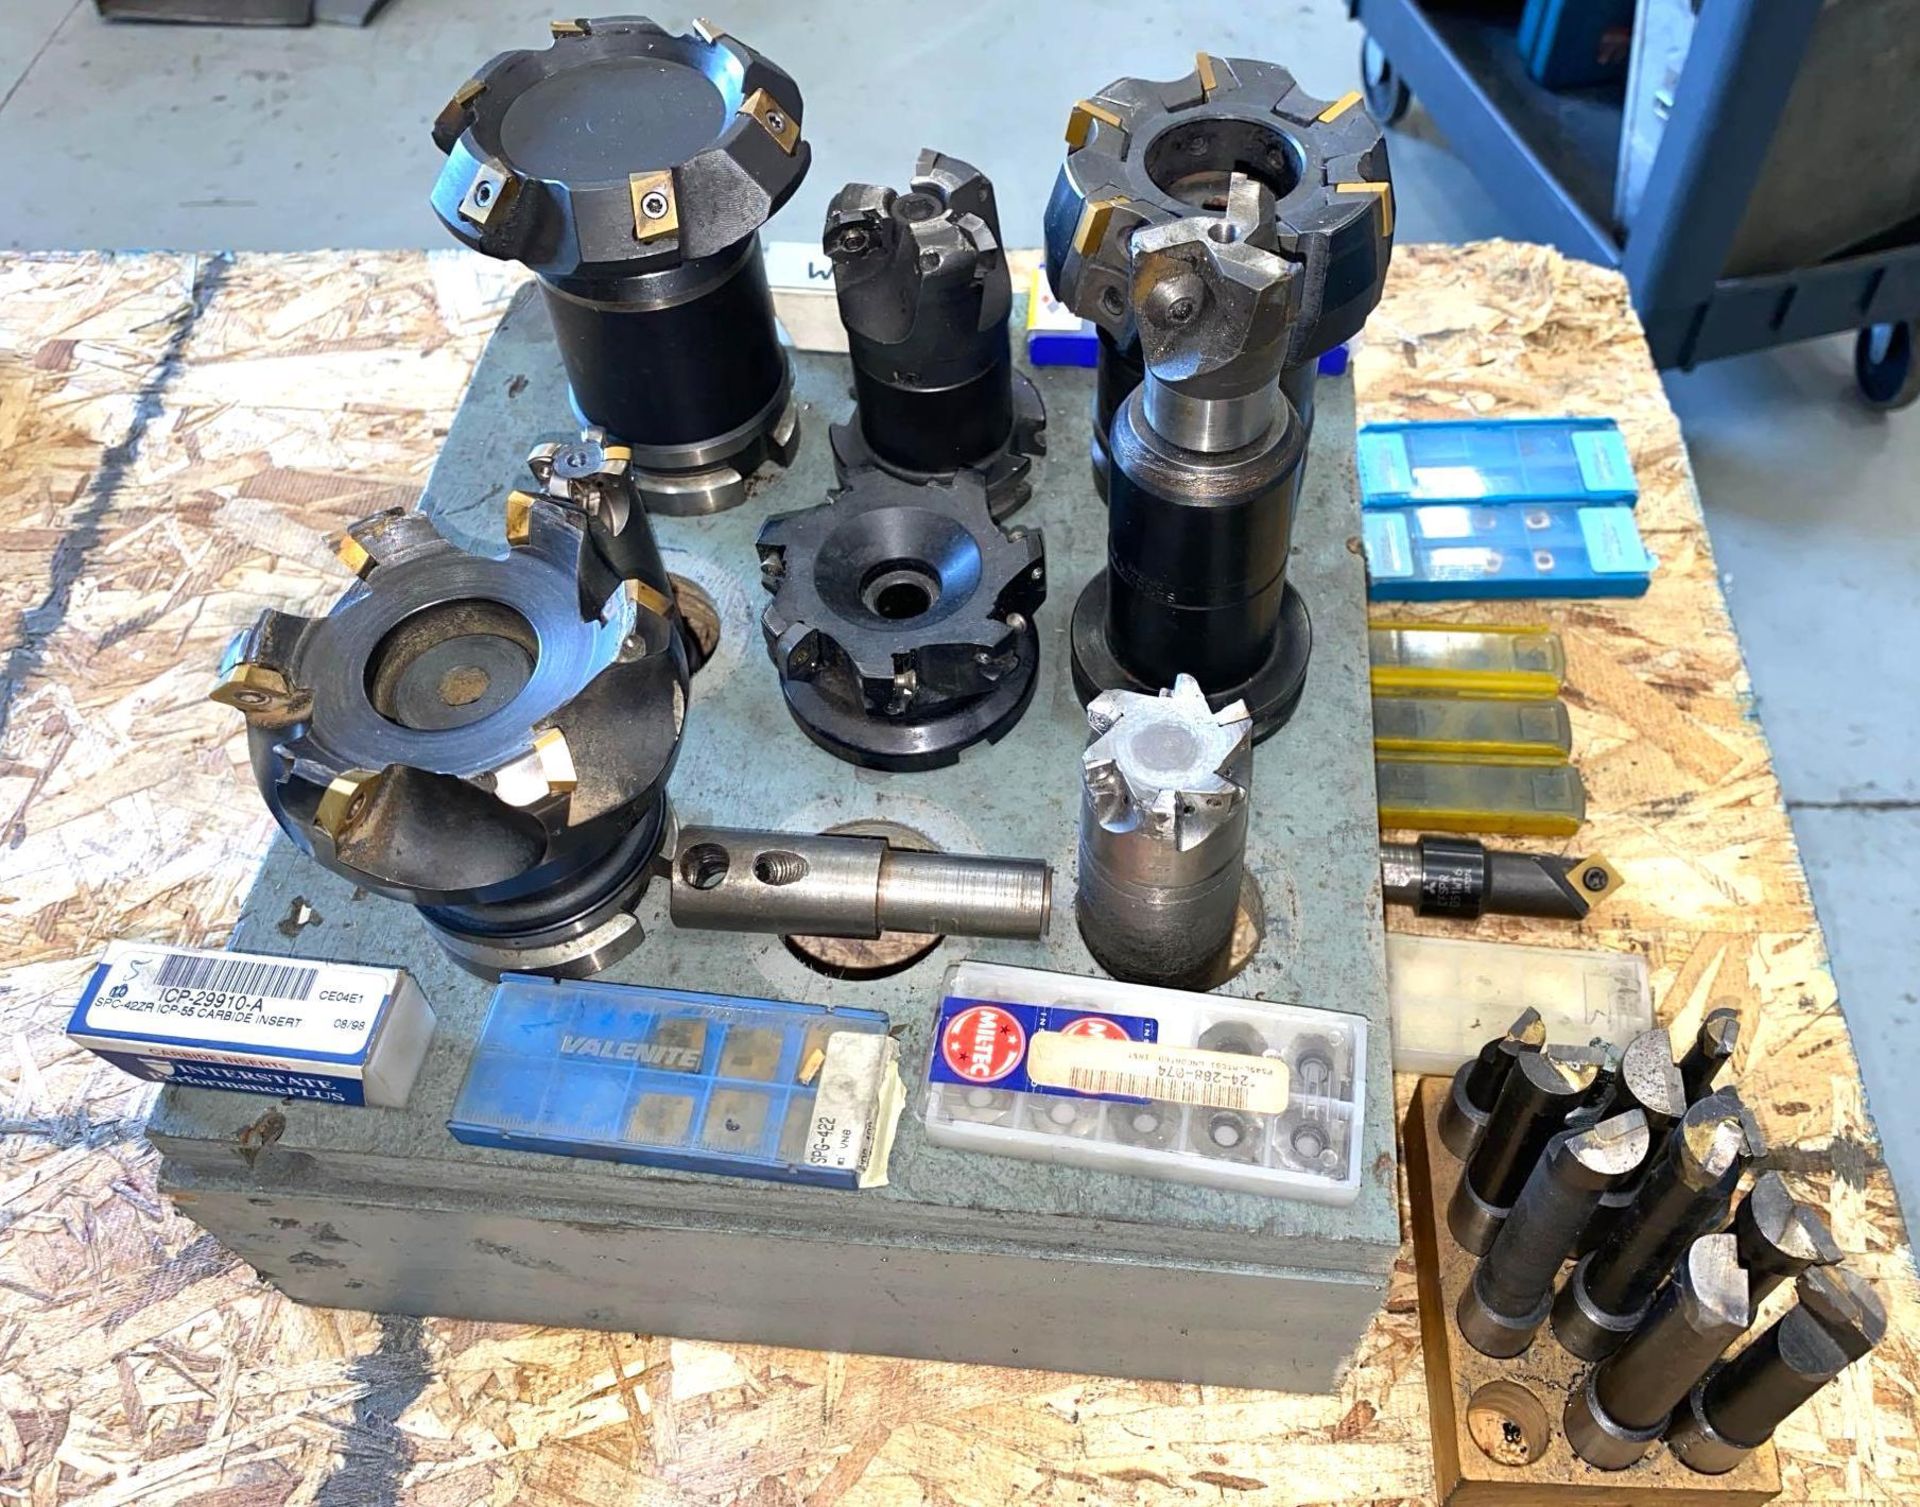 Lot of Carbide Insert Milling Cutters, Boring Bars, Carbide Inserts - Image 5 of 6